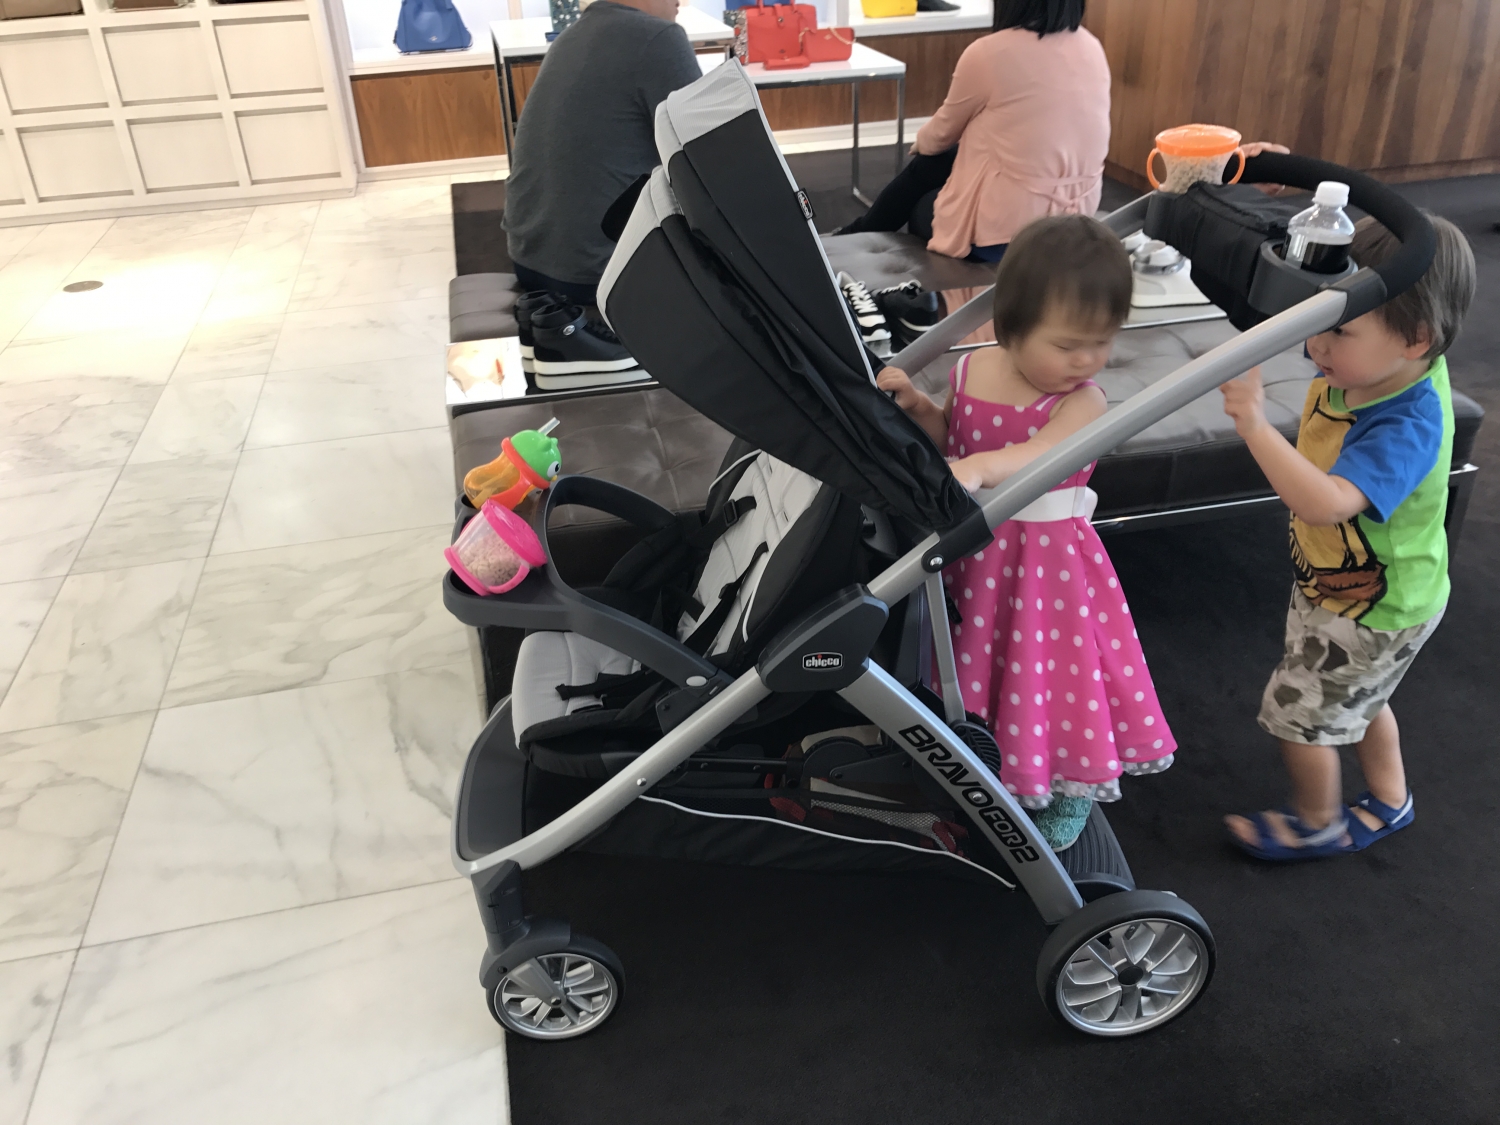 chicco stroller standing board